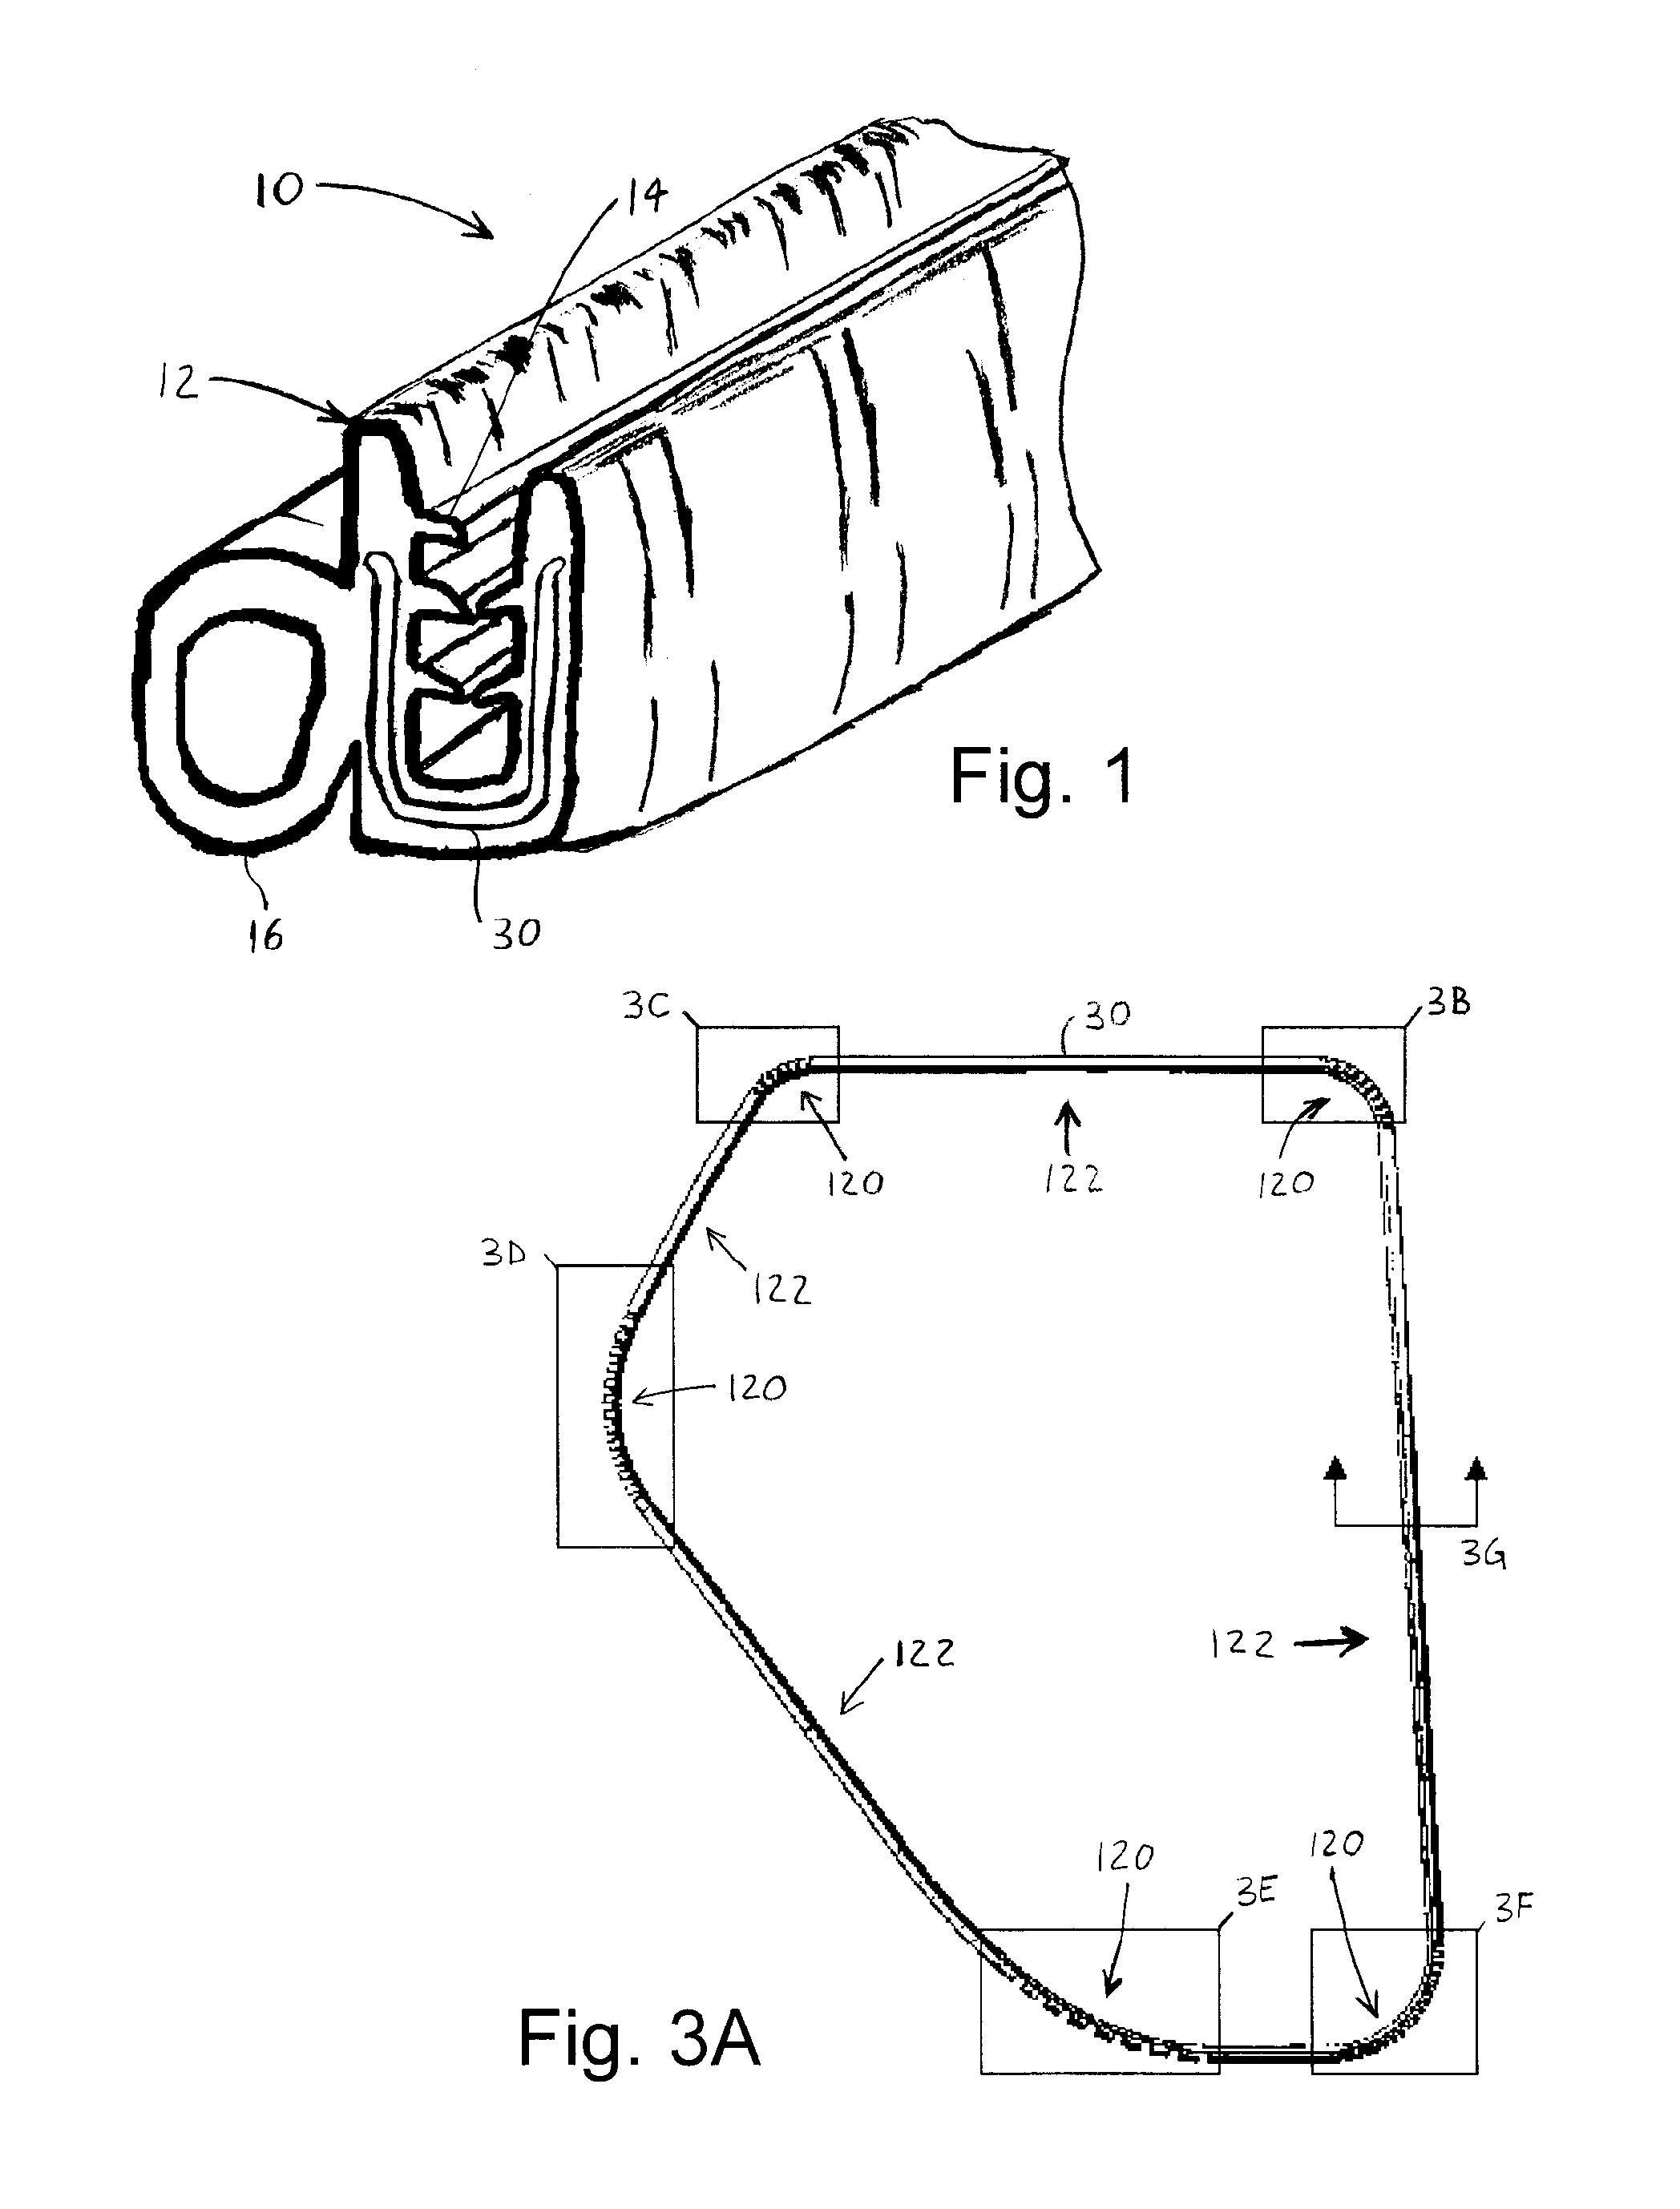 Coextruded polymer molding having selectively notched carrier